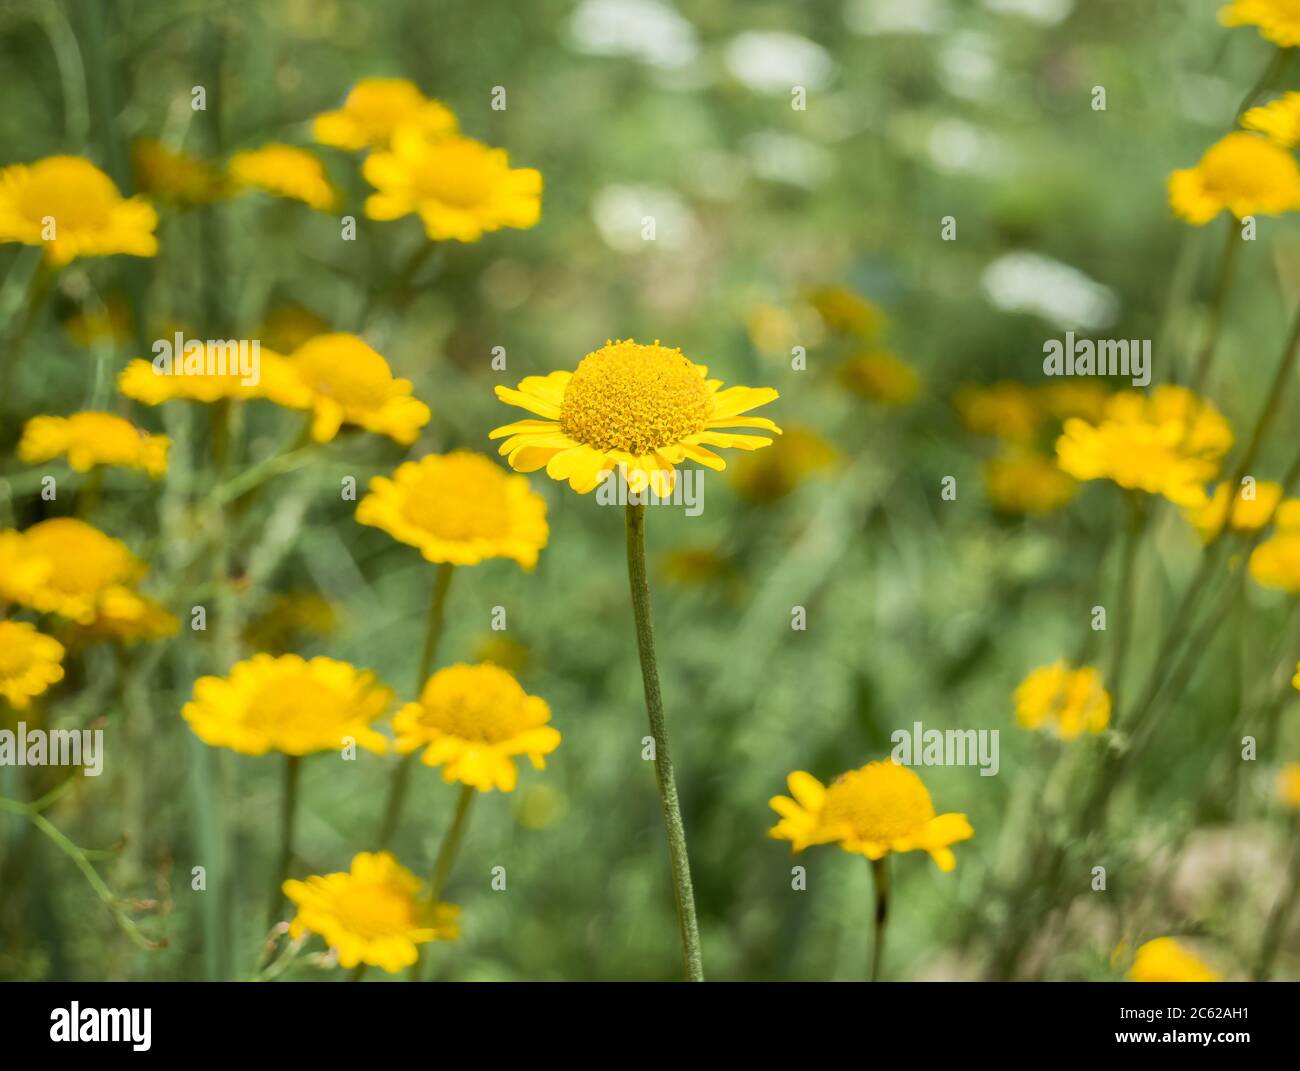 Beautiful yellow flower plant in the daisy family Asteraceae. Stock Photo